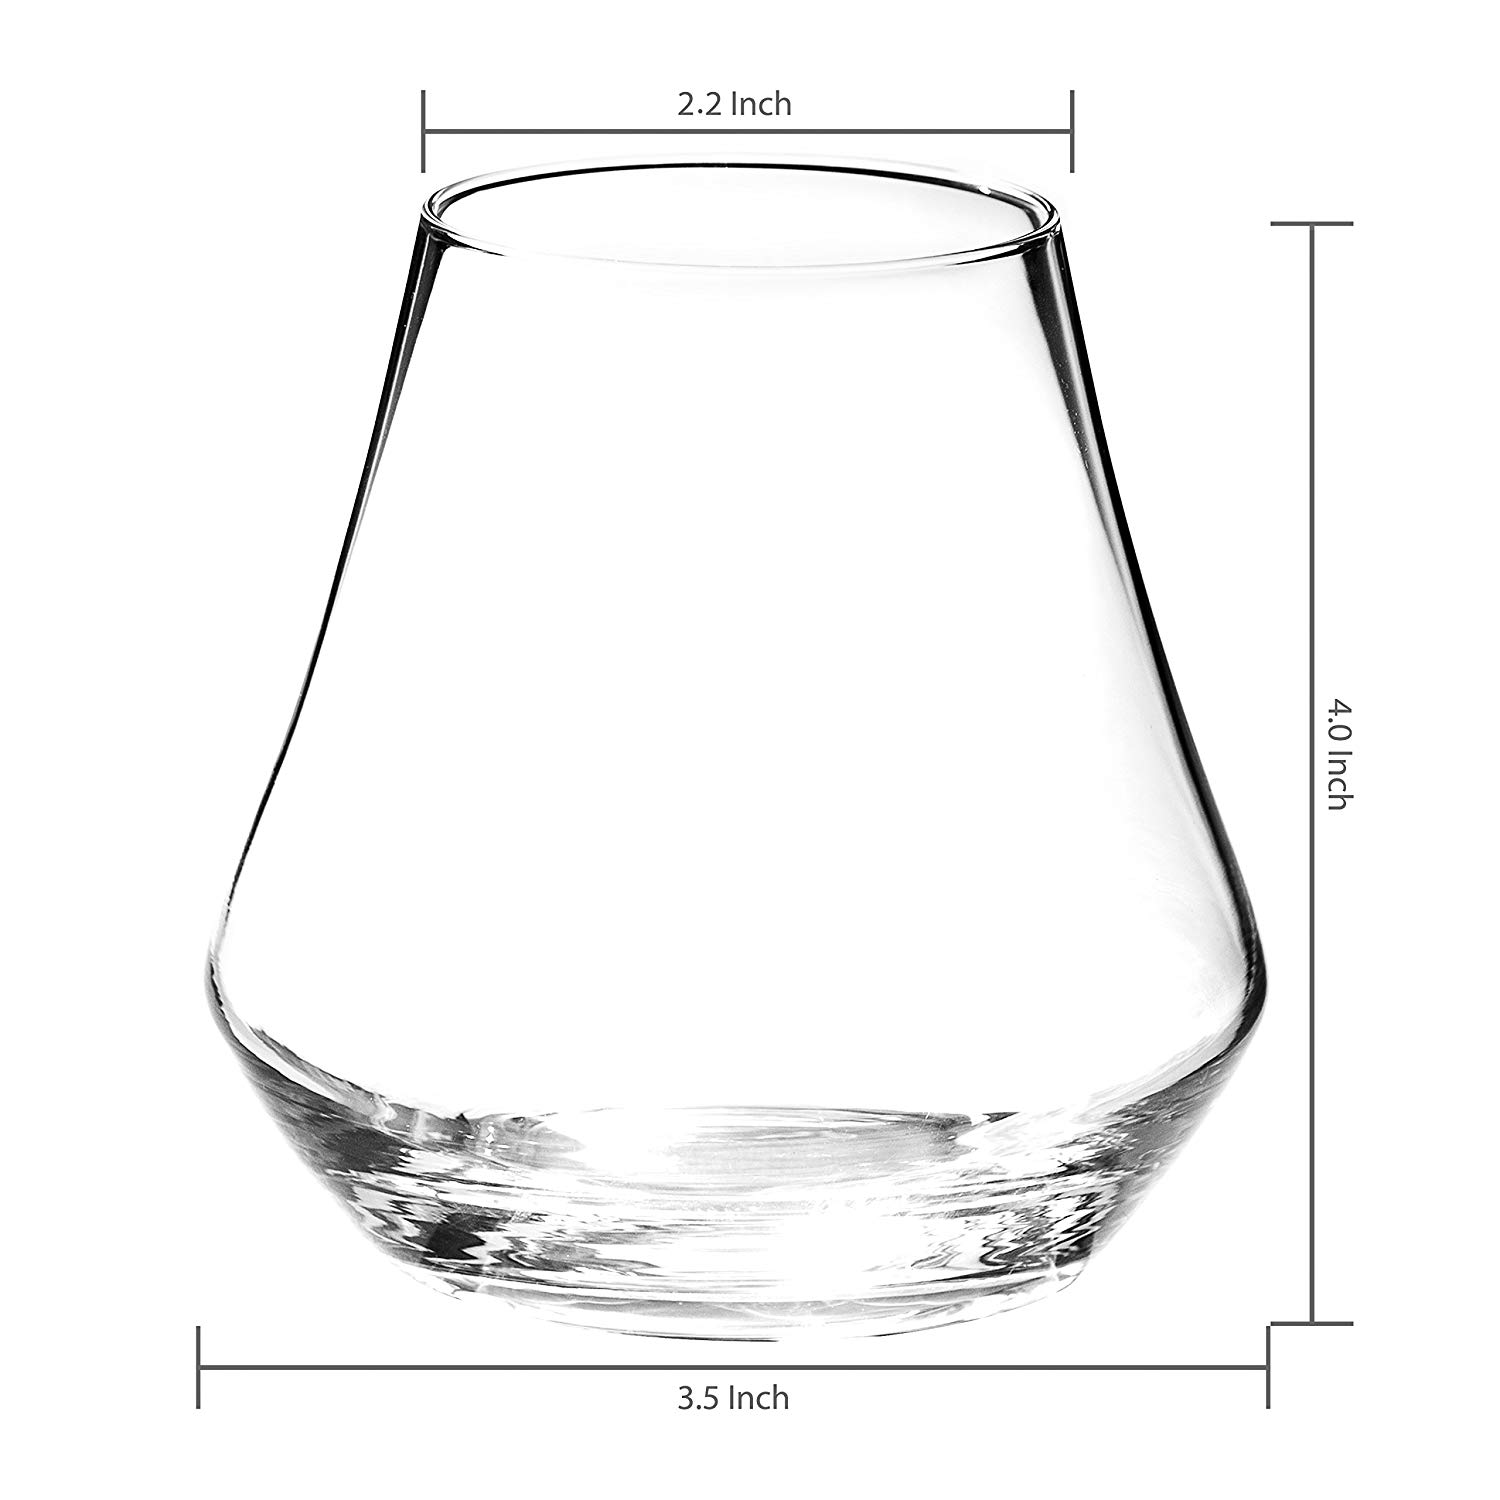 Factory selling Pine Wood Gift Box - Clear Crystal Tulip Shaped Whiskey Tasting Snifter Tumbler Glasses Gift Box Set of 4 – Shunstone